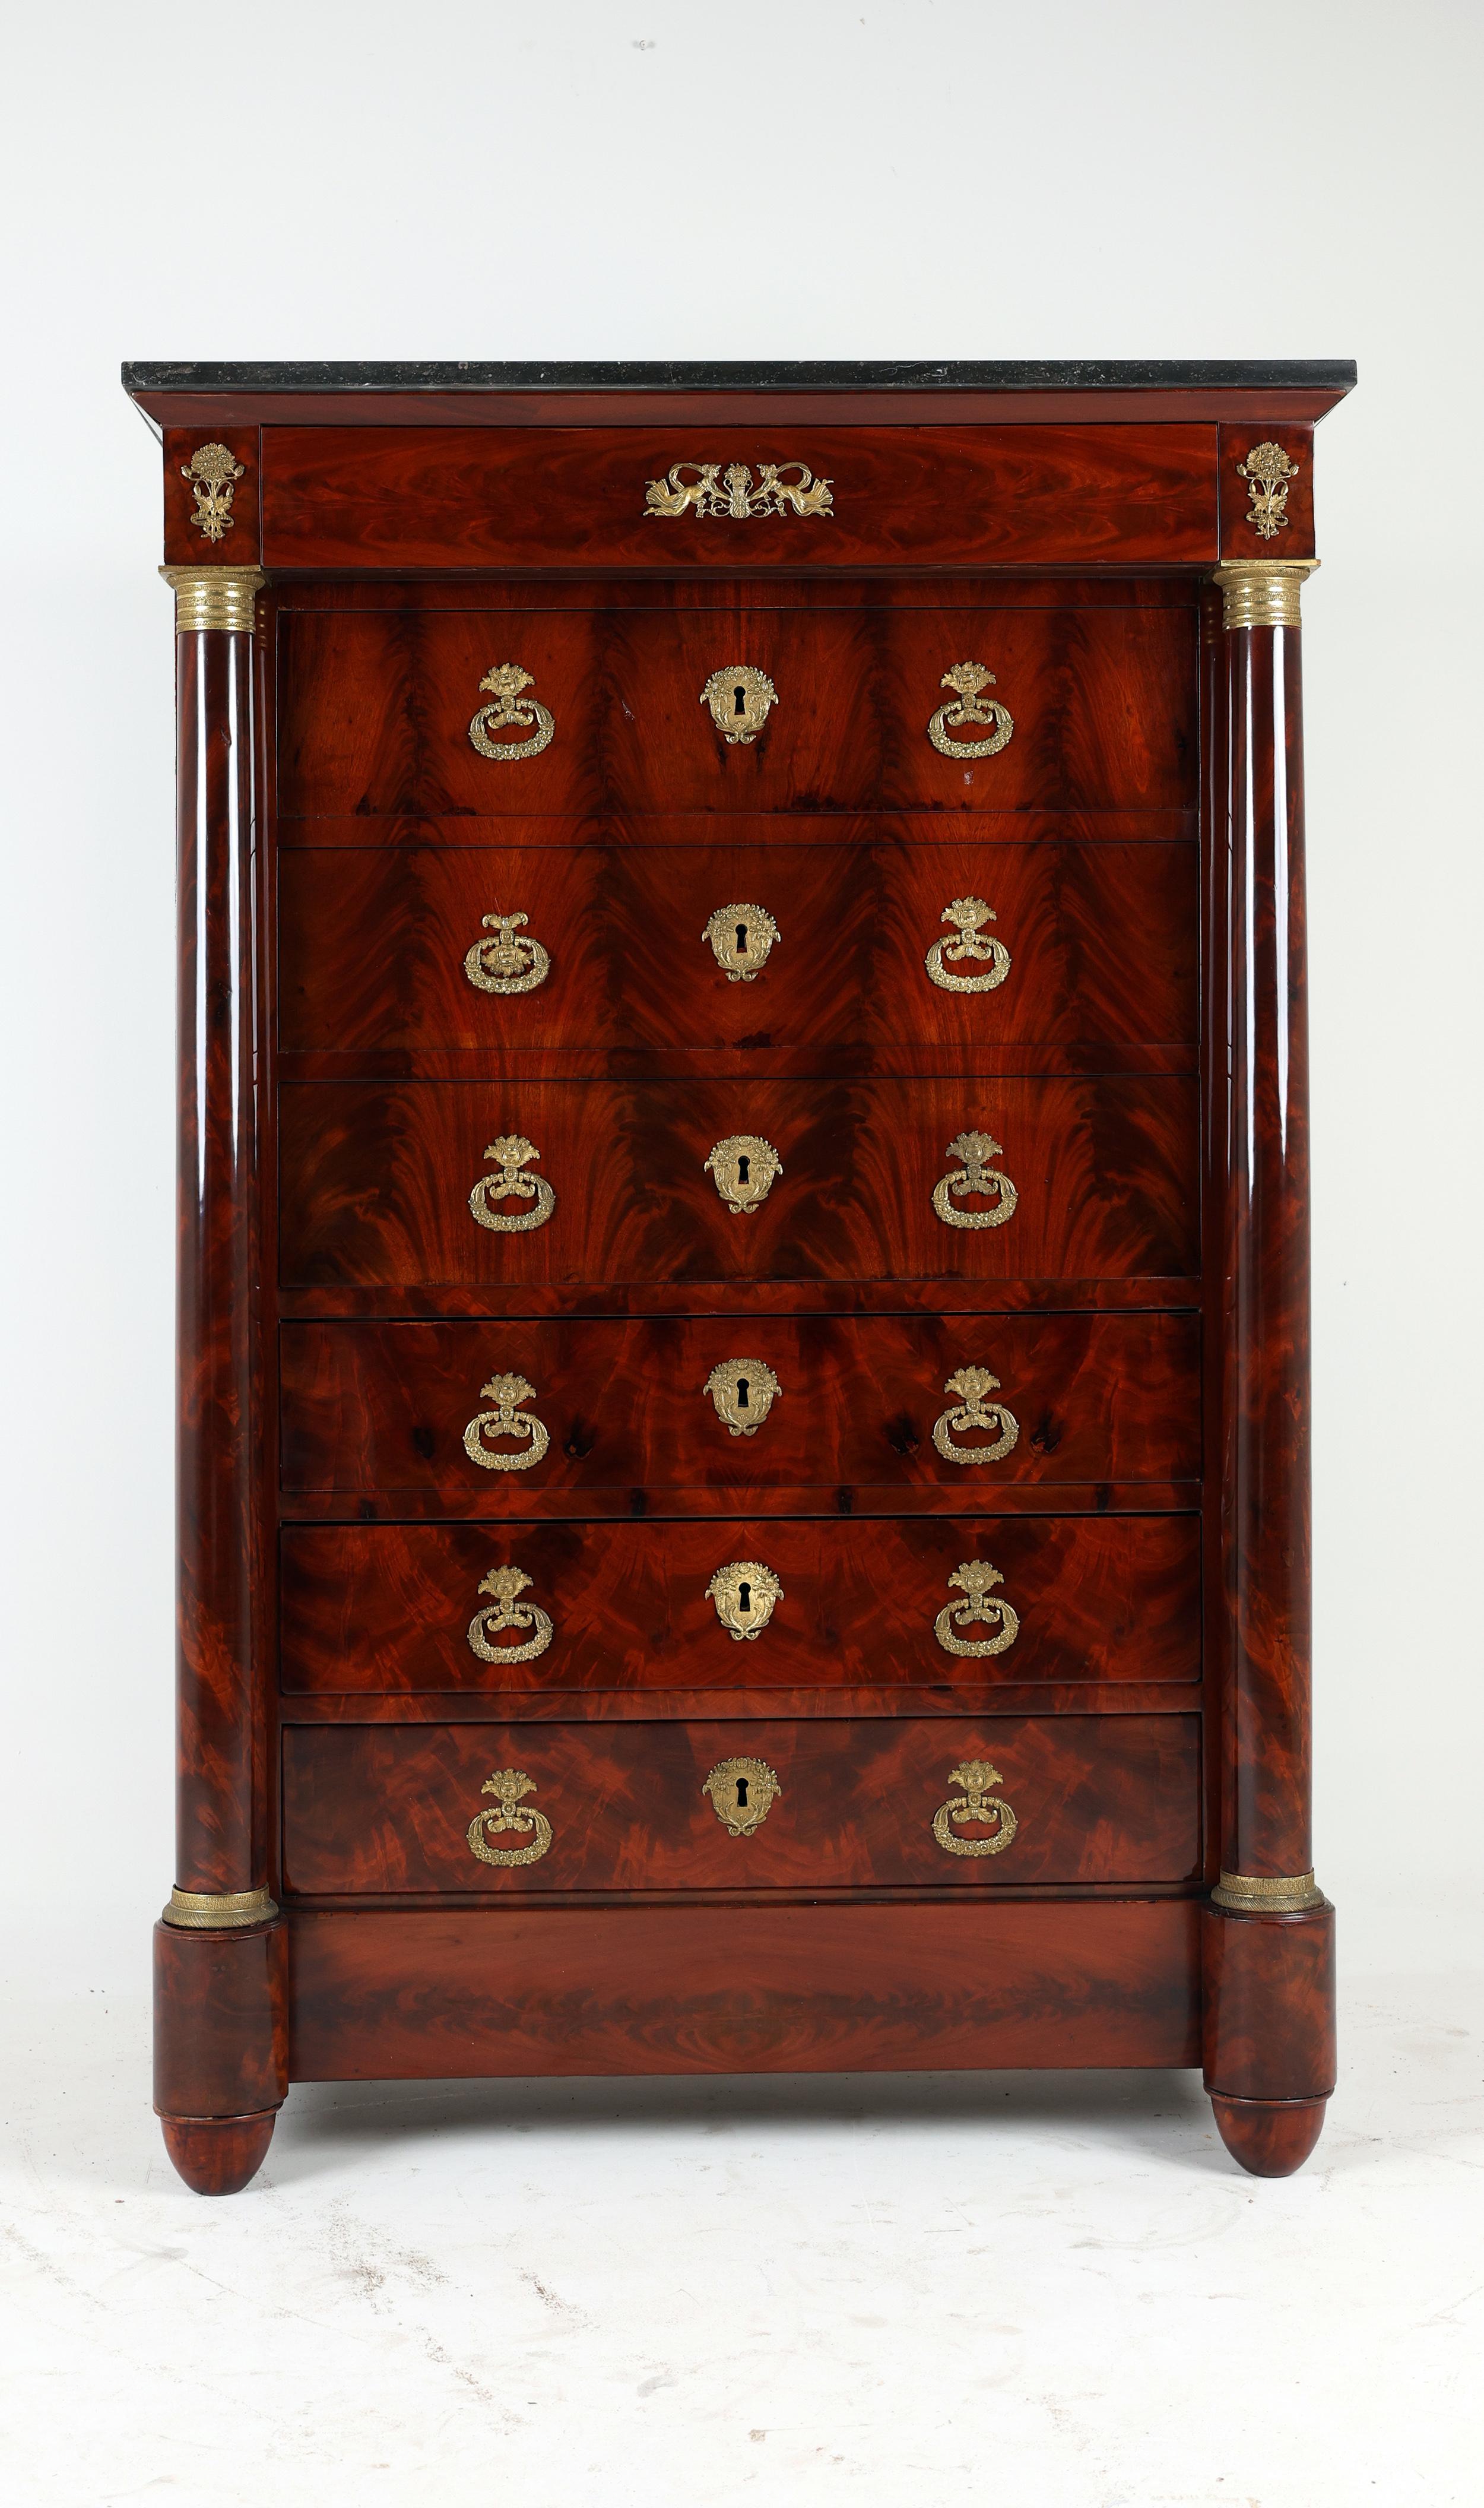 Empire Semainier,
Mahogany, 
France, 1825-1830

,,The Empire style is an early-nineteenth-century design movement in architecture, furniture, other decorative arts, and the visual arts, representing the second phase of Neoclassicism''.

A fine